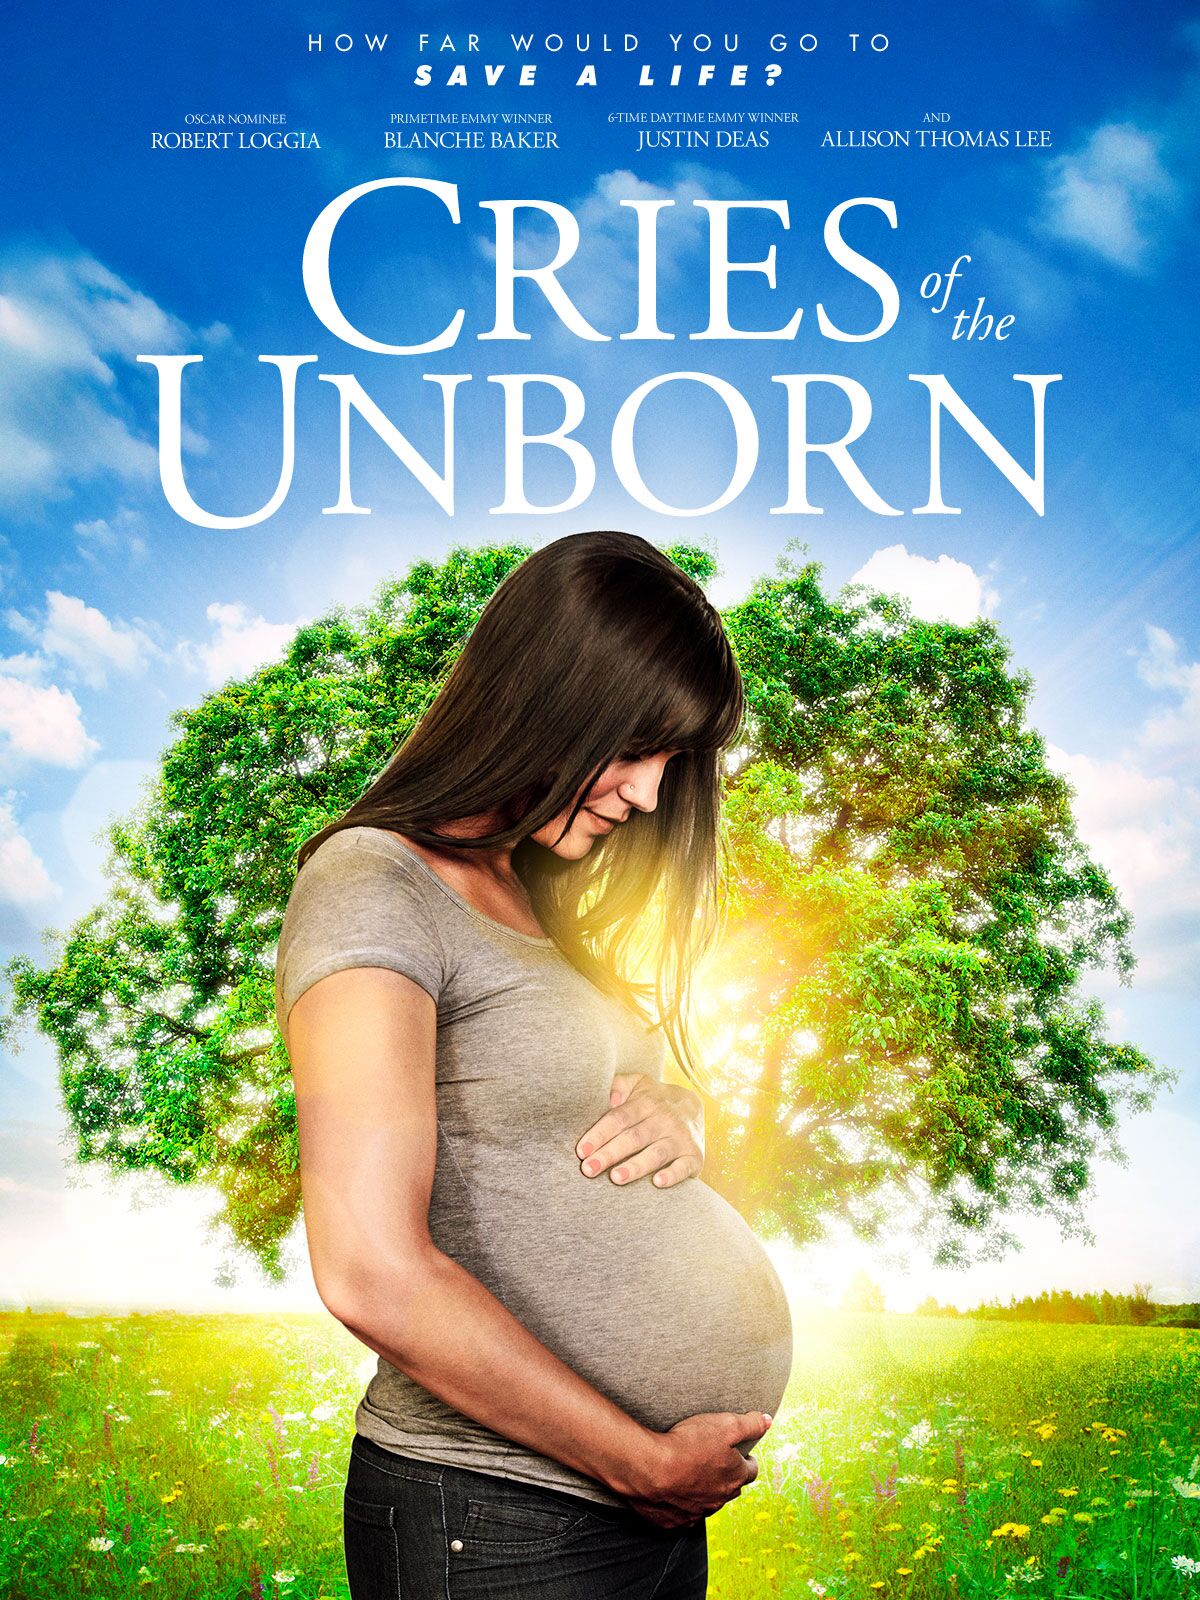 Cries of the Unborn (2017) starring Allison Thomas Lee on DVD on DVD